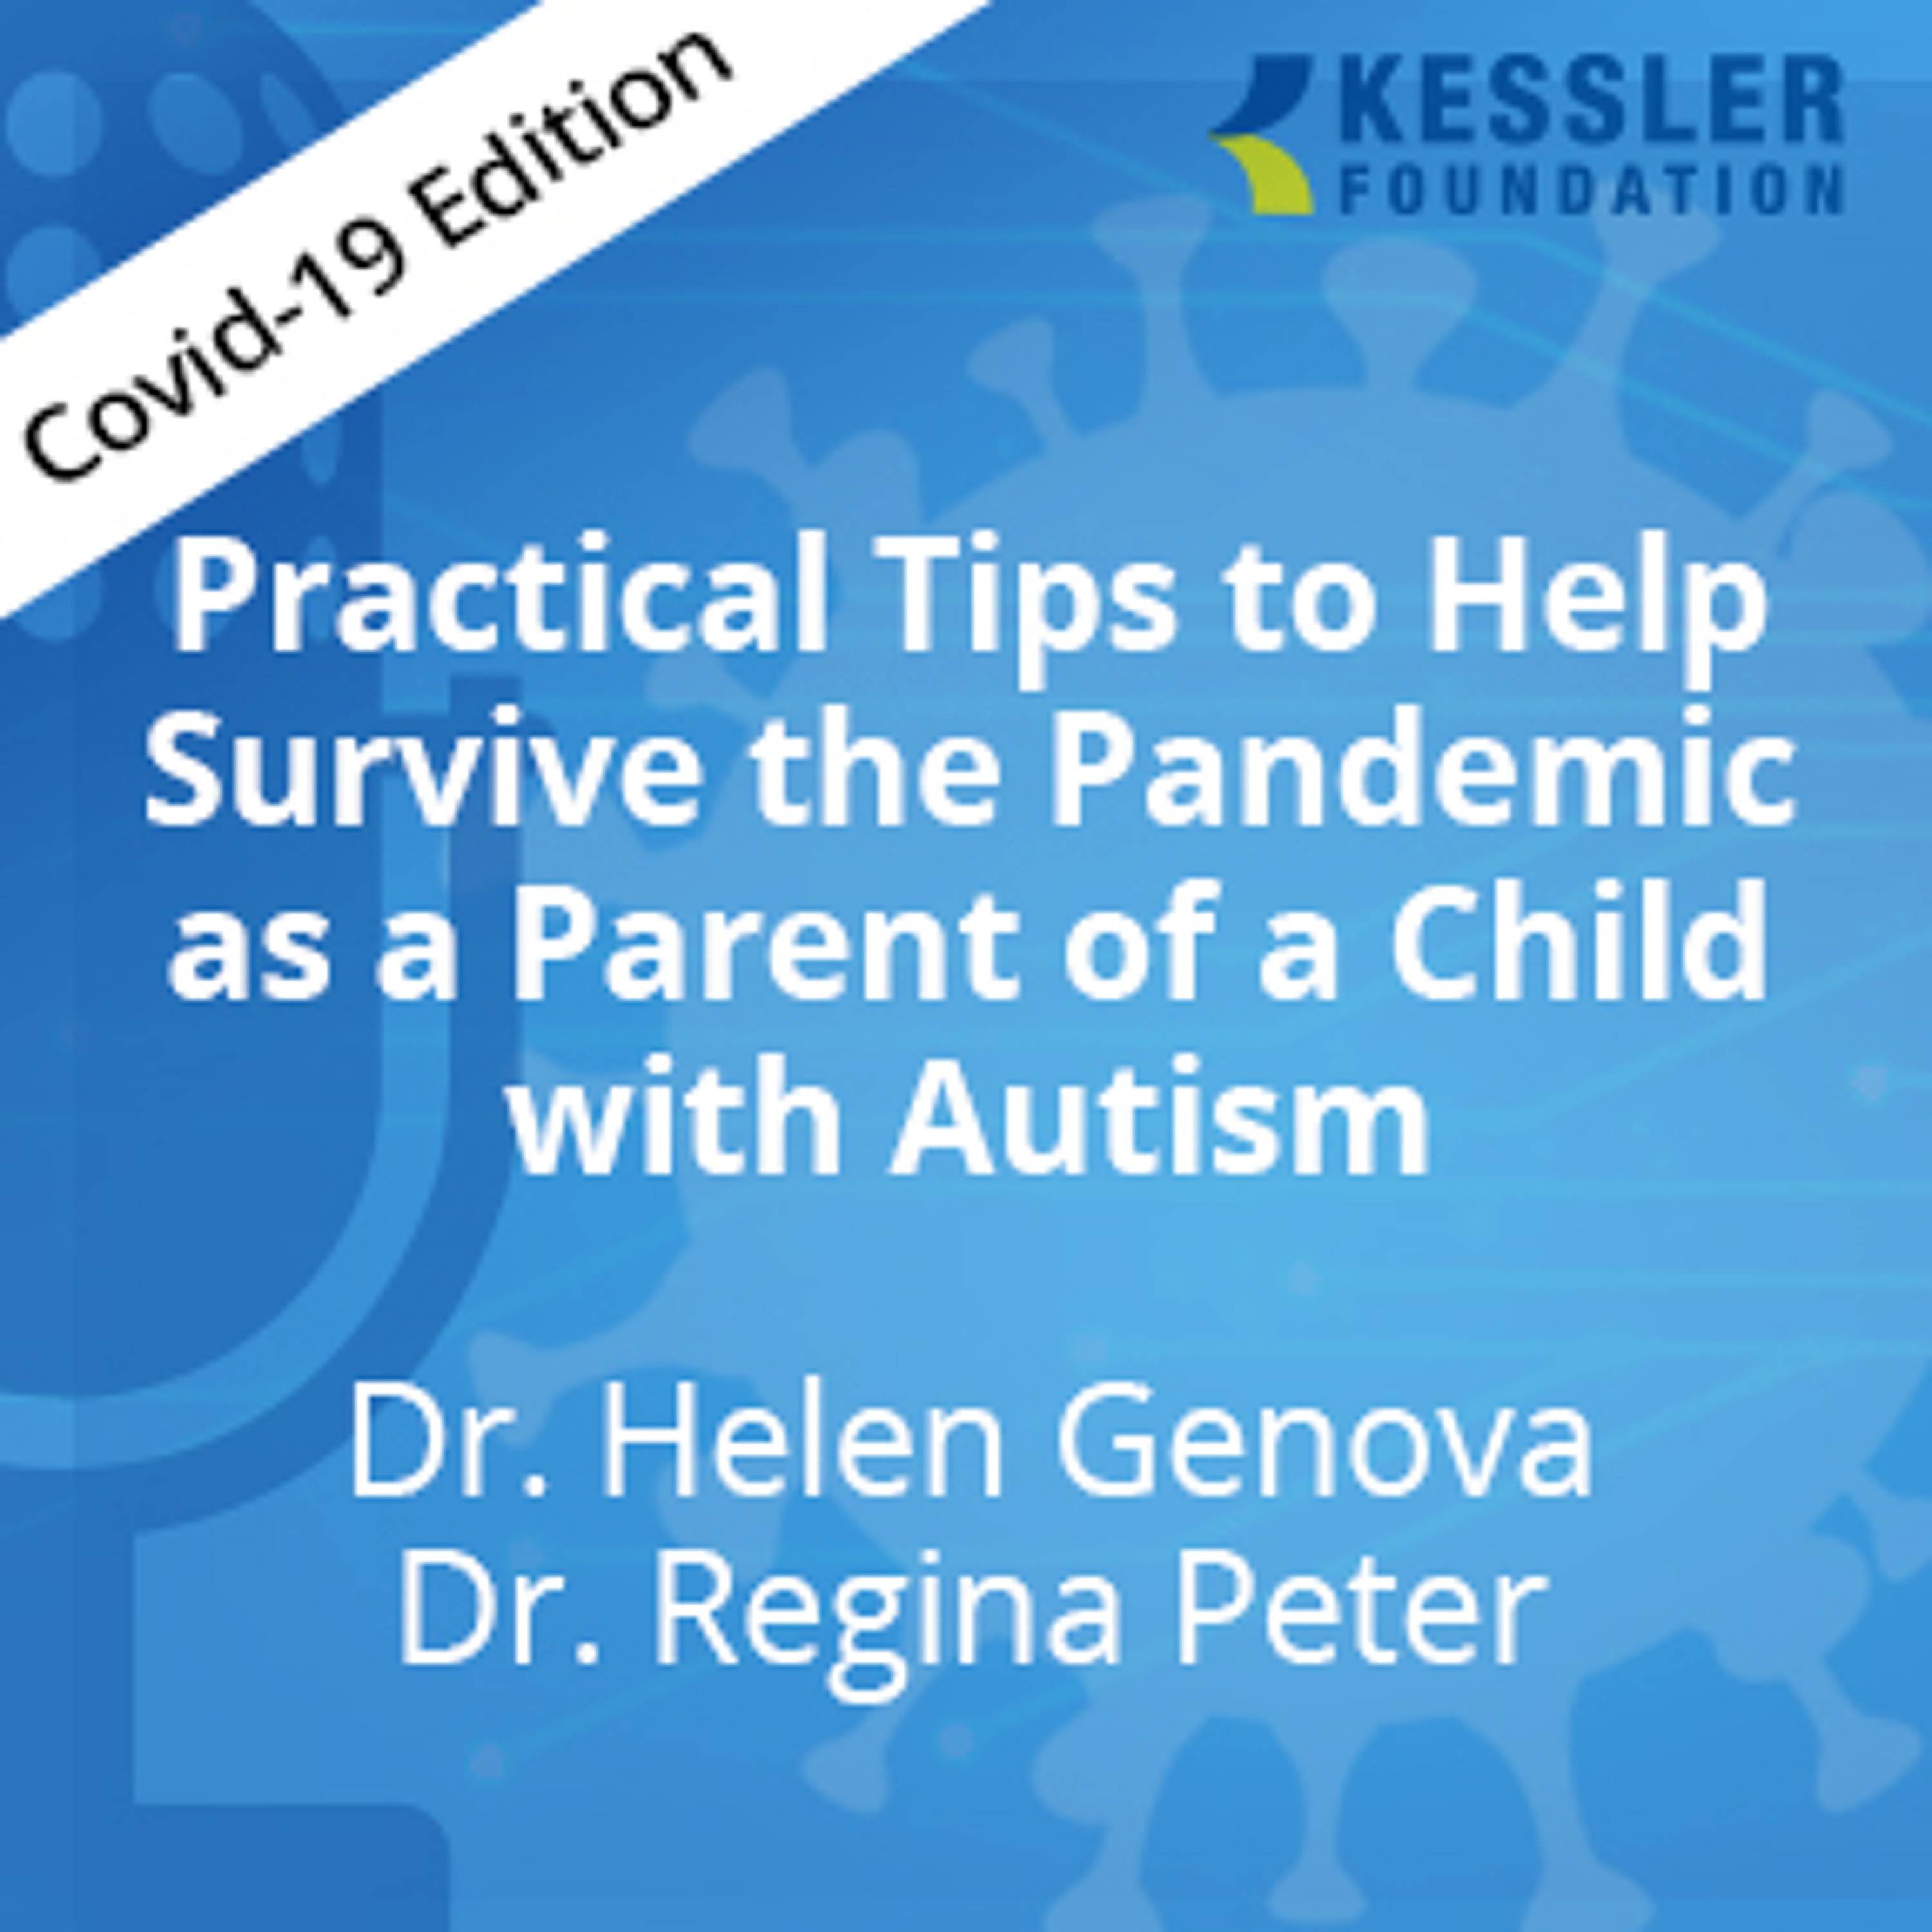 Practical Tips to Help Survive the Pandemic as a Parent of a Child with Autism-COVID Edition, Ep1